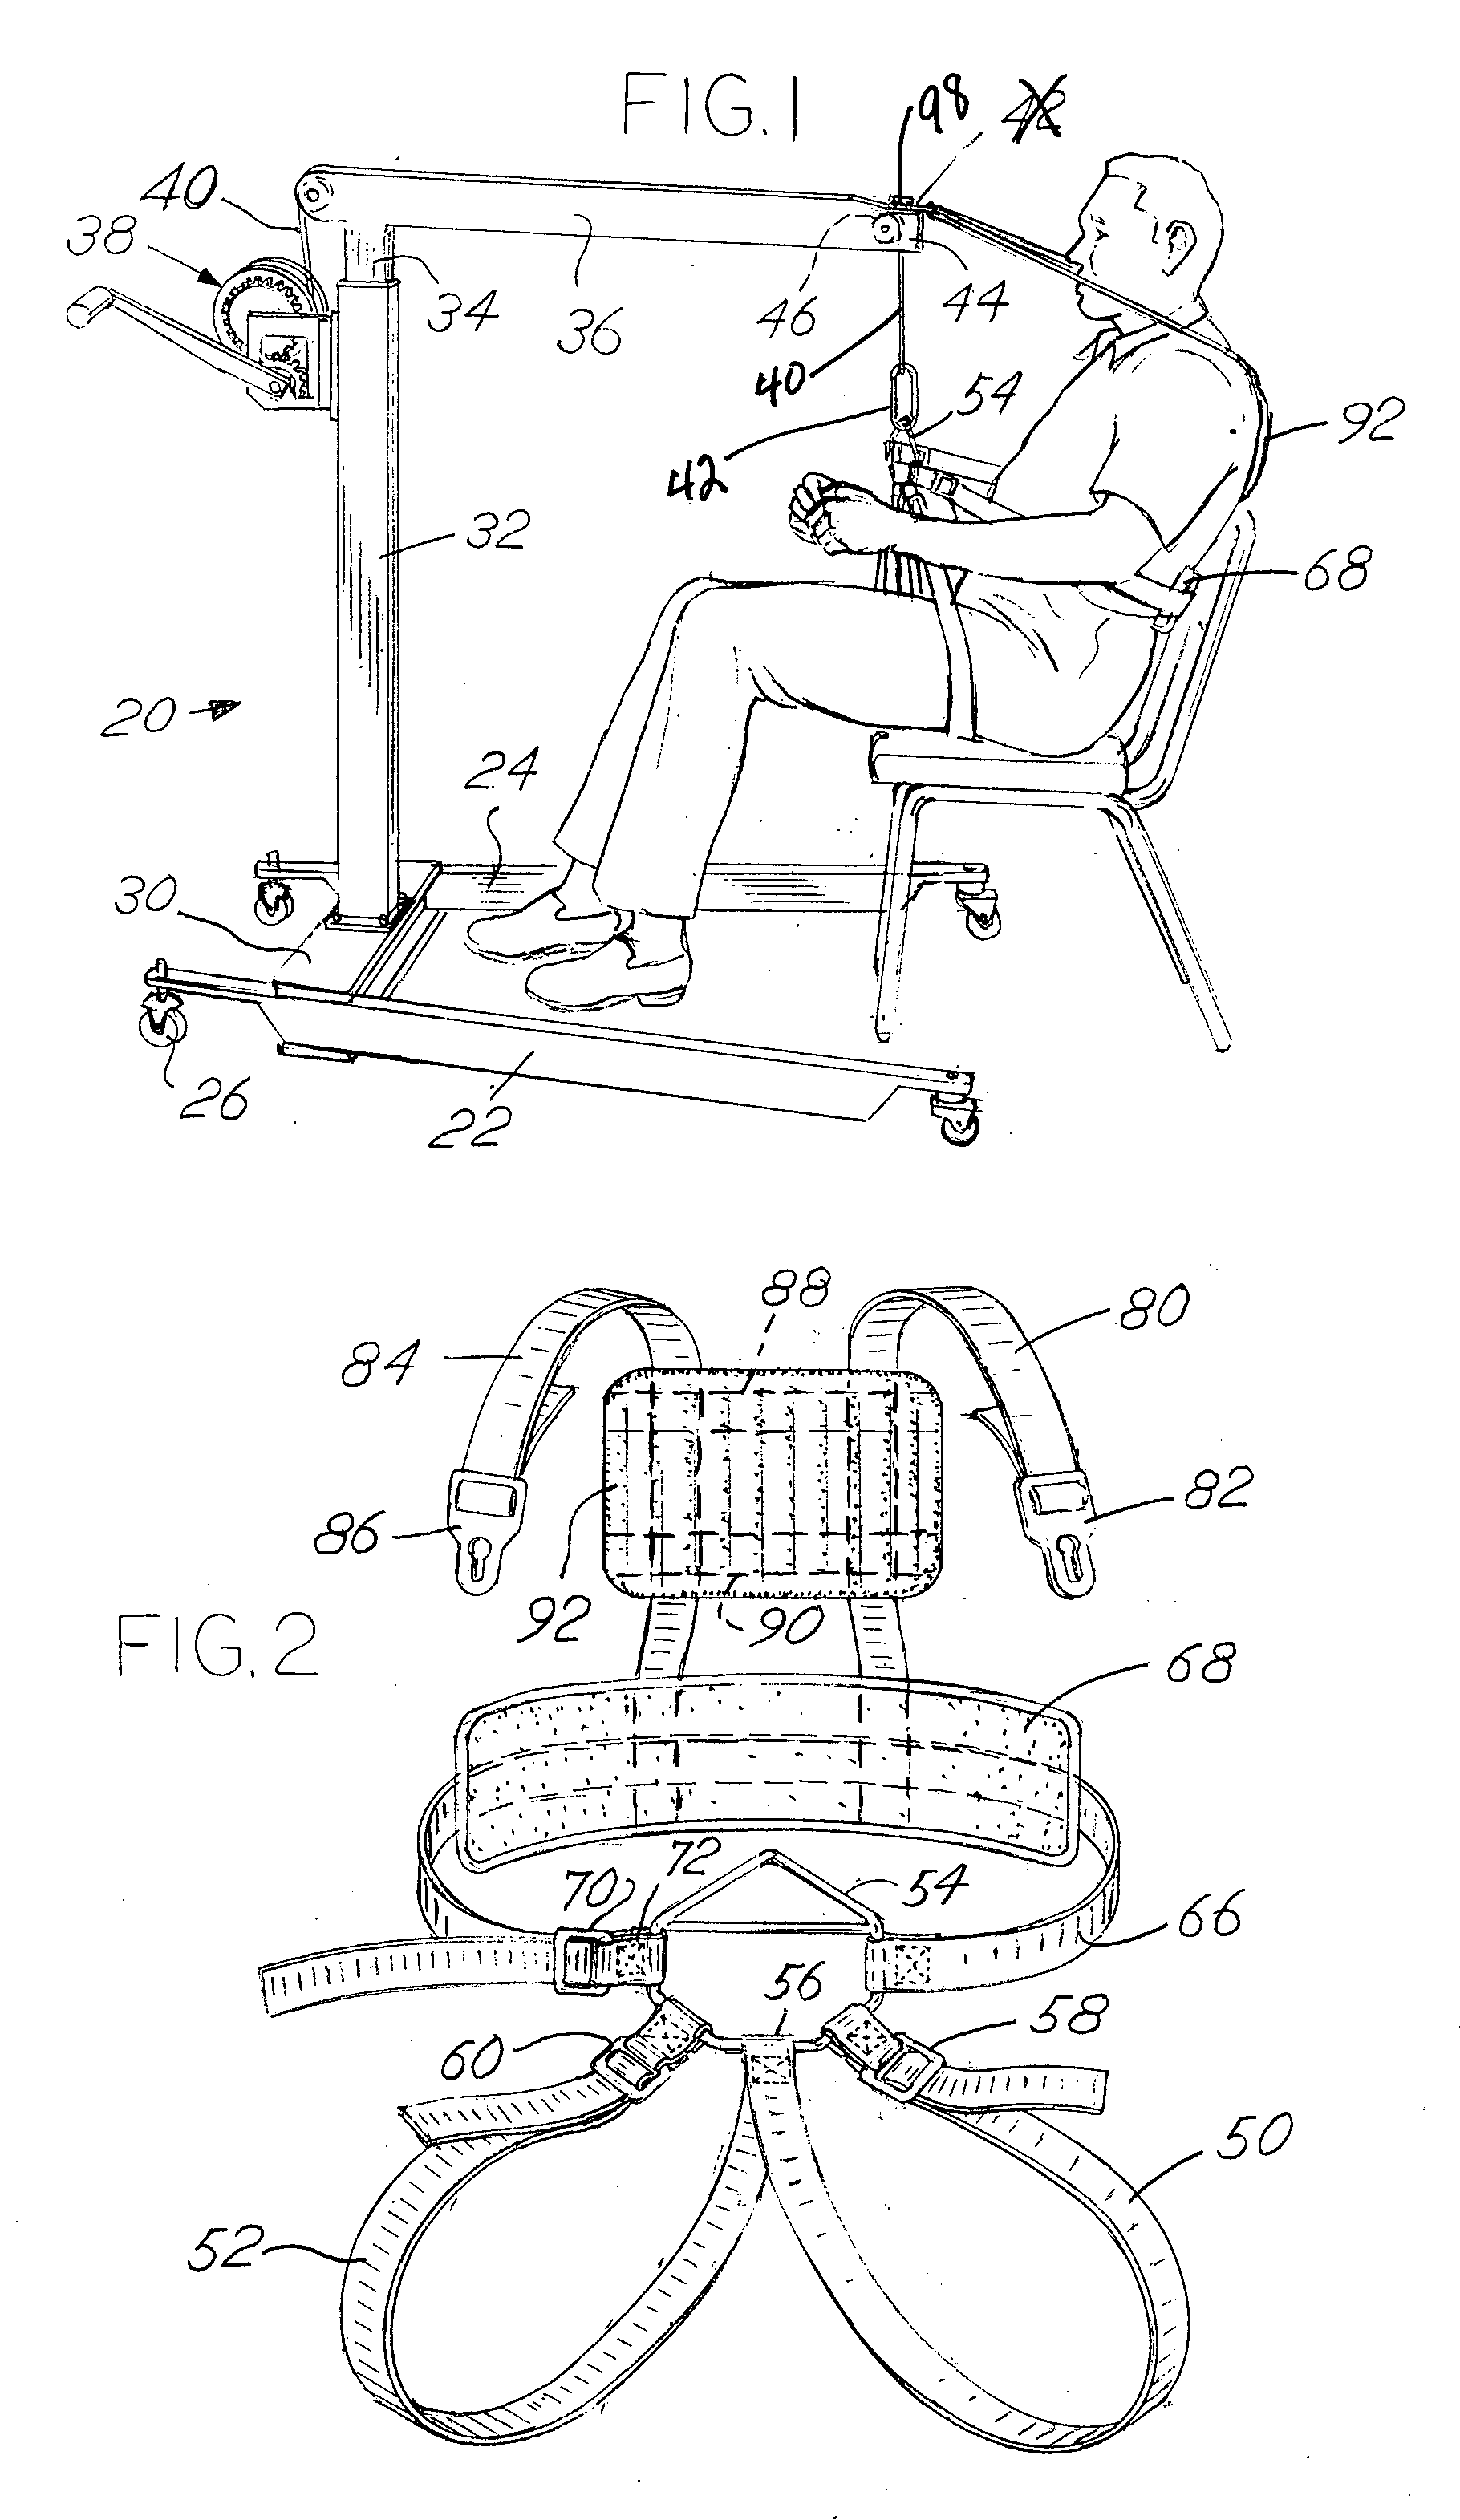 Support and transfer apparatus for transport of an incapacitated individual